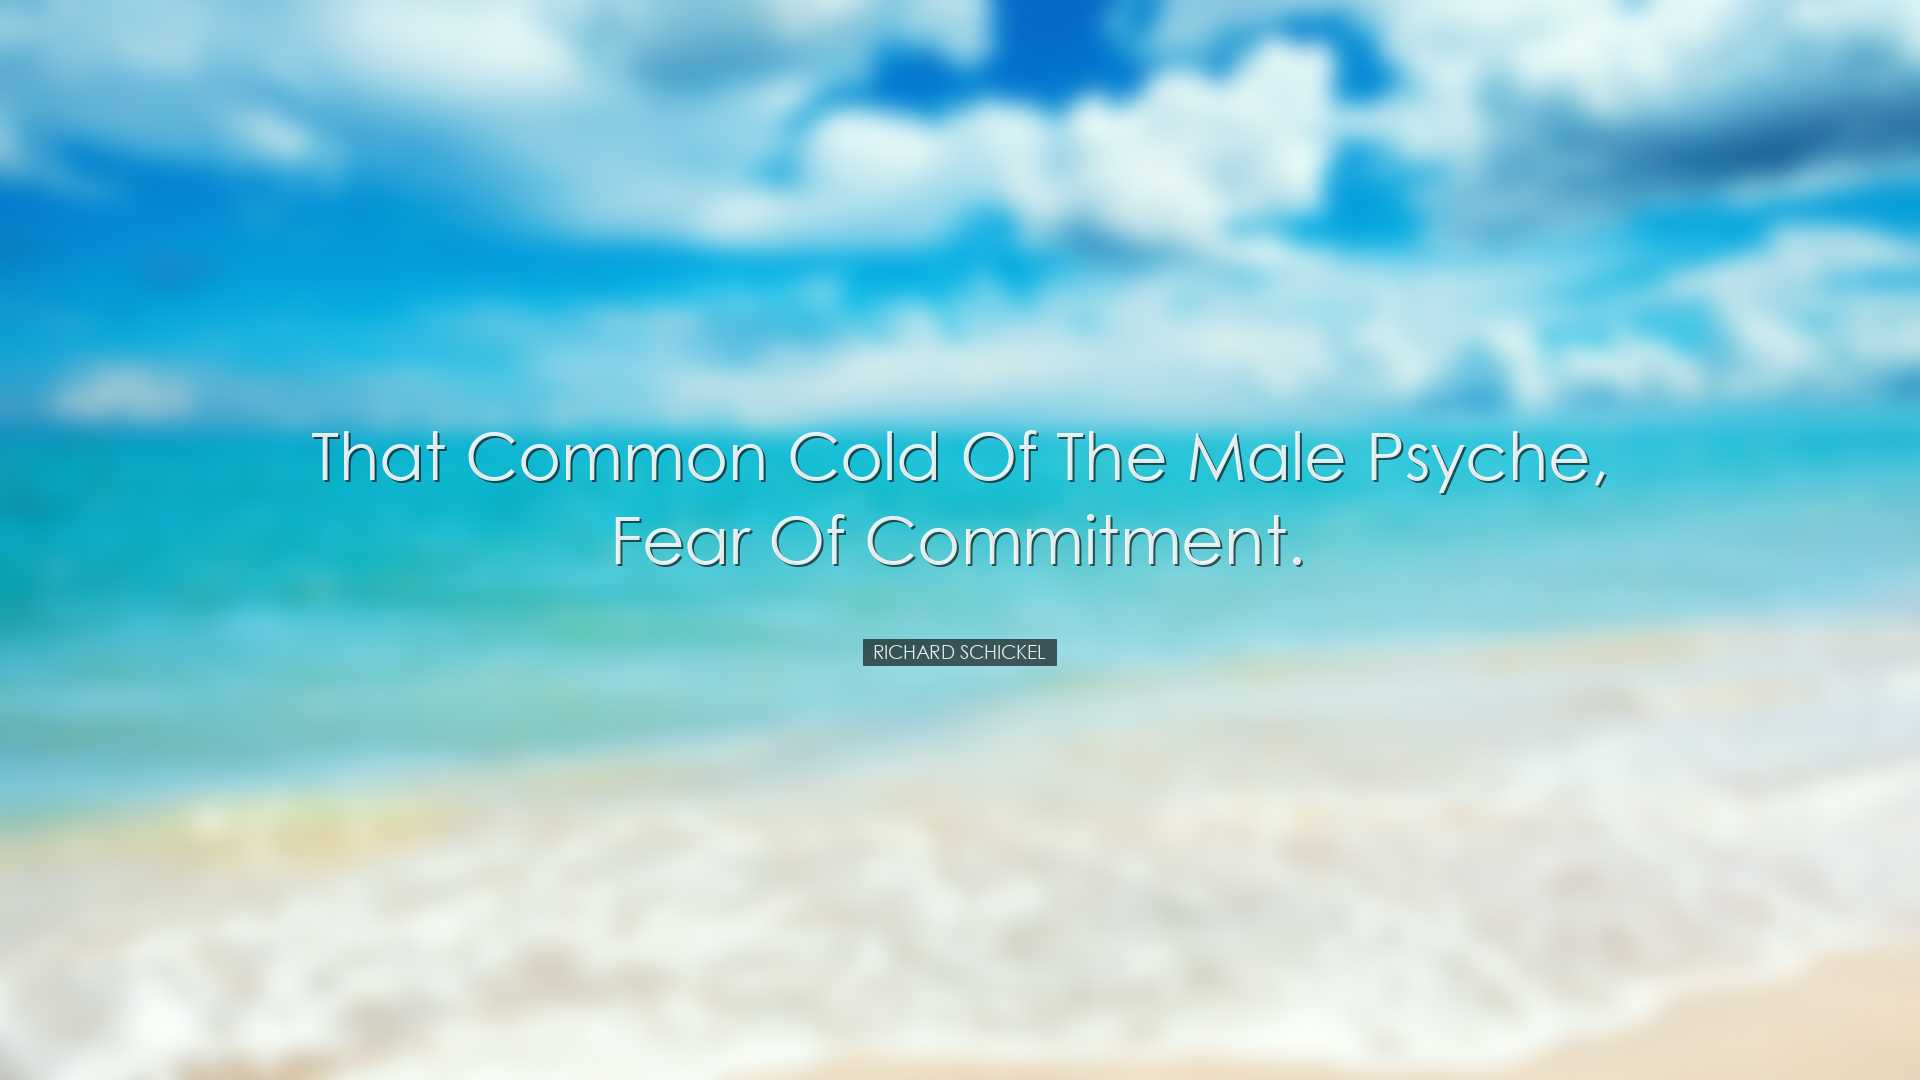 That common cold of the male psyche, fear of commitment. - Richard